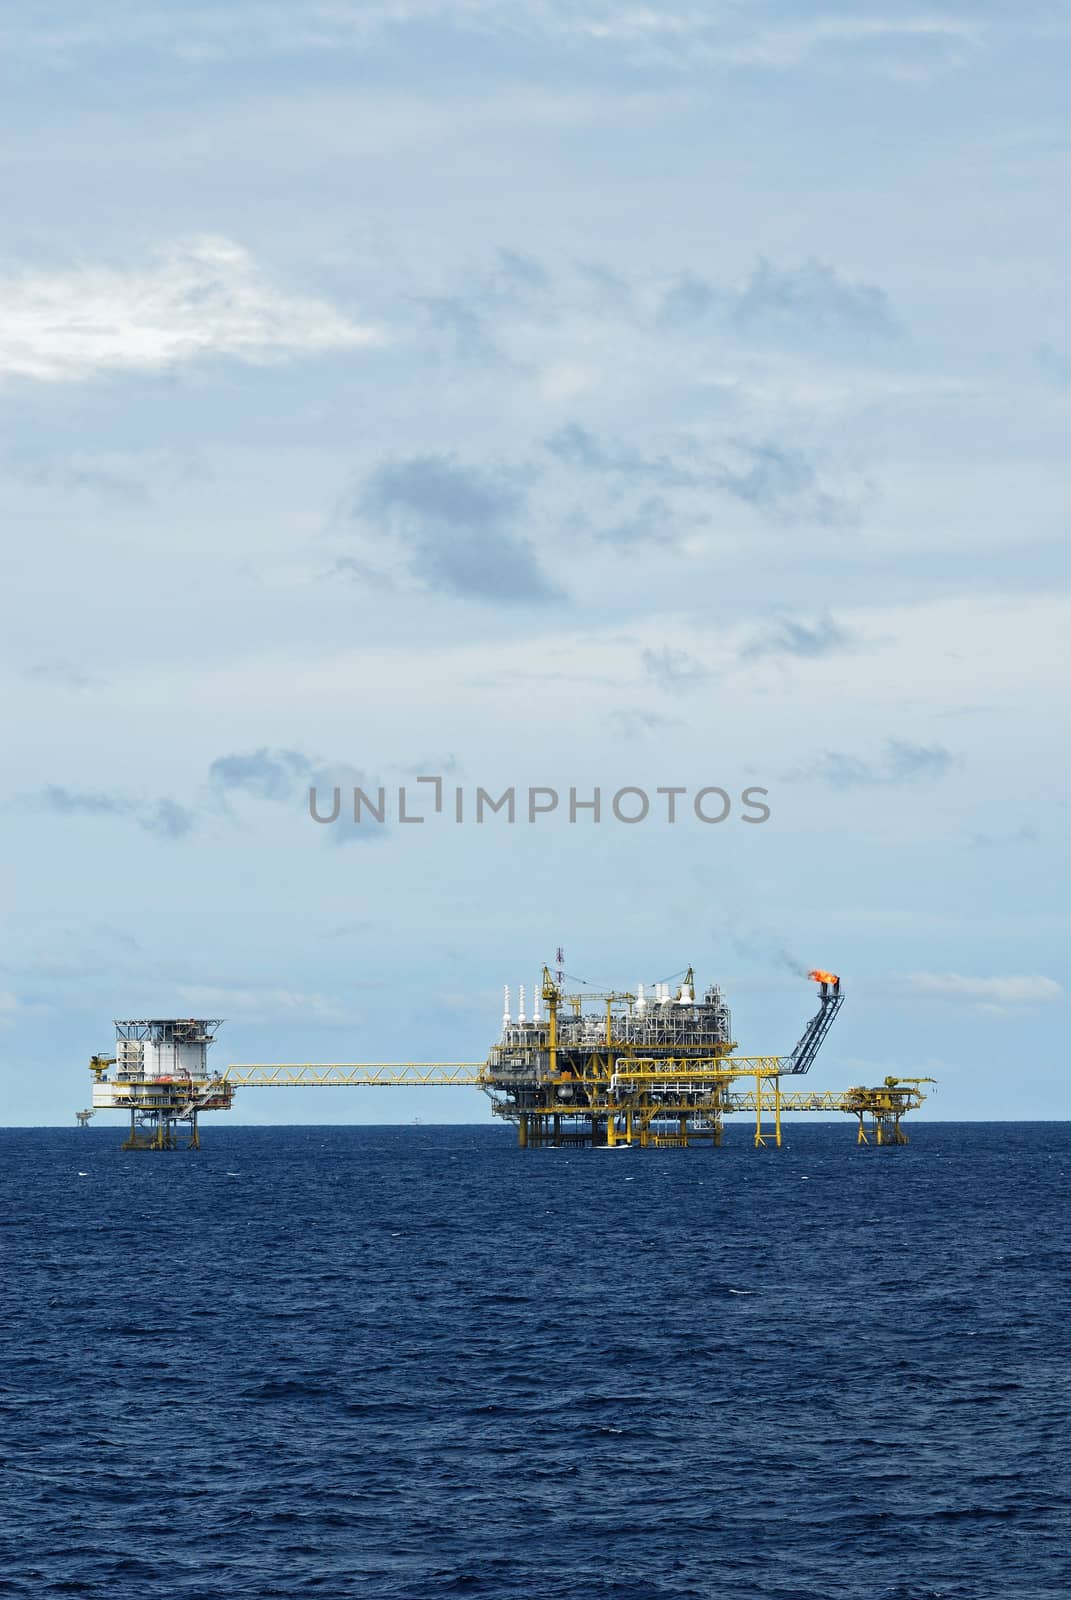 Oil and gas drilling platform by think4photop